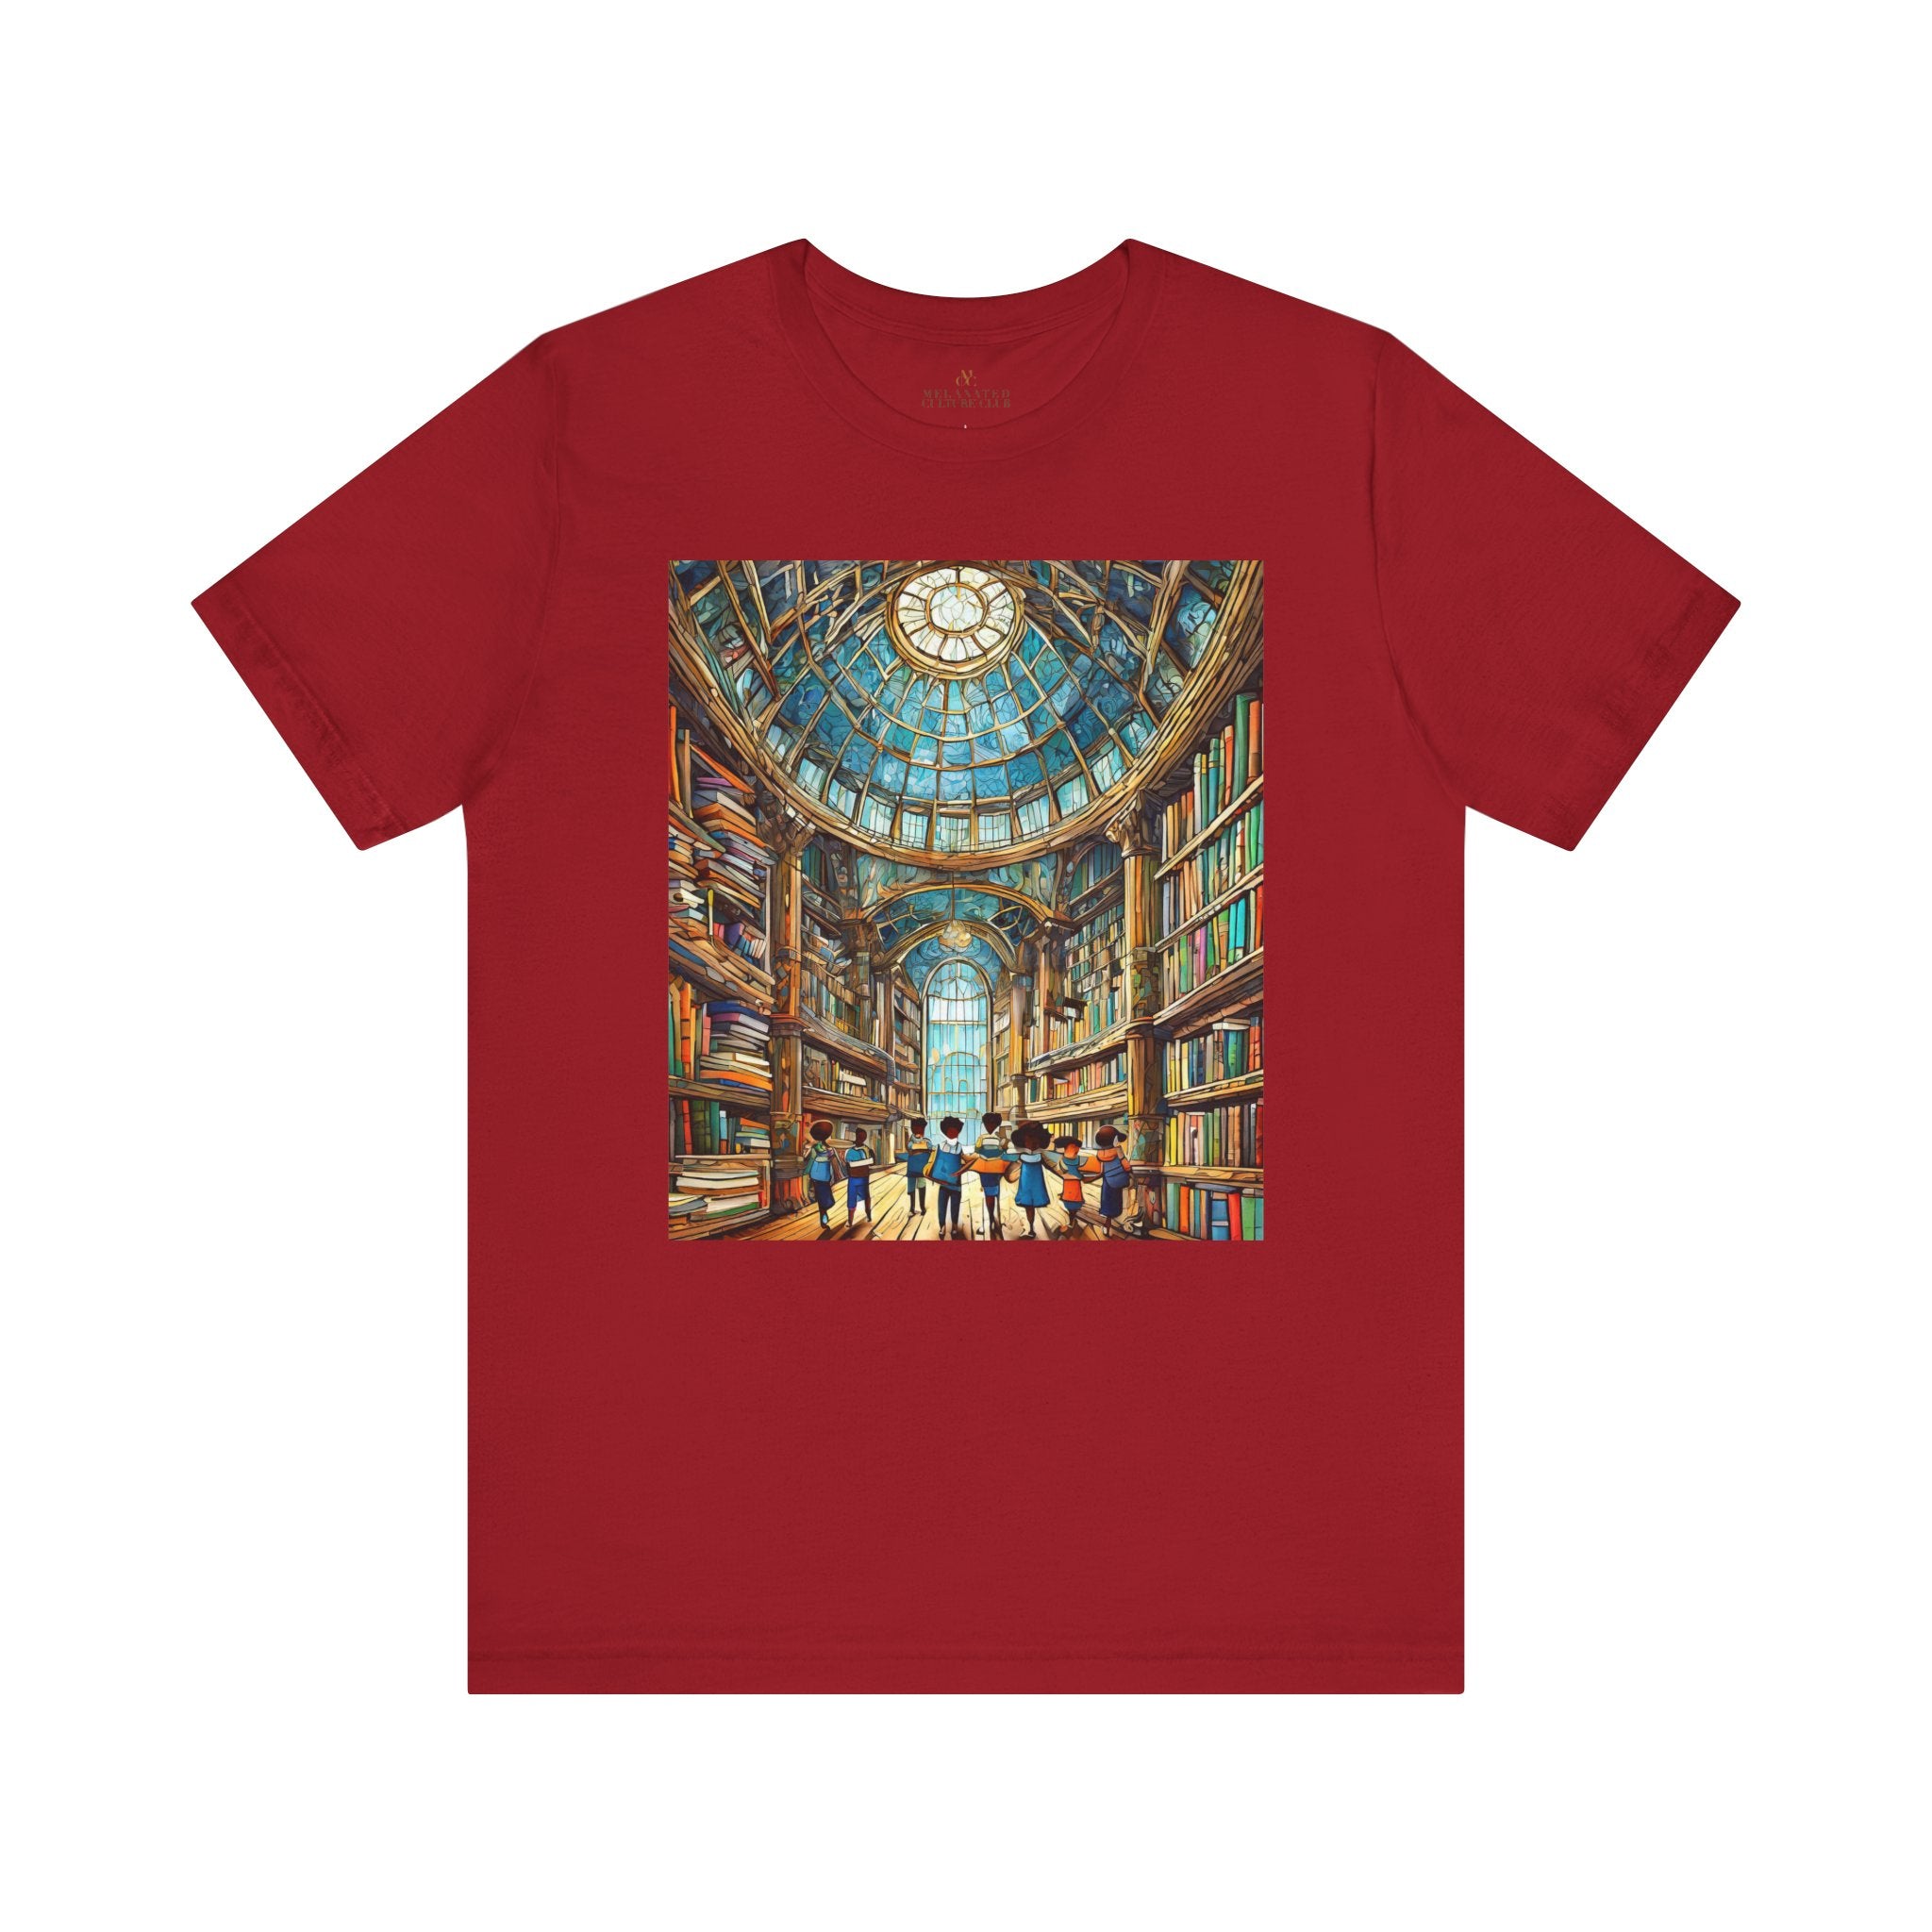 African American Kids at Library Tee shirt in red.